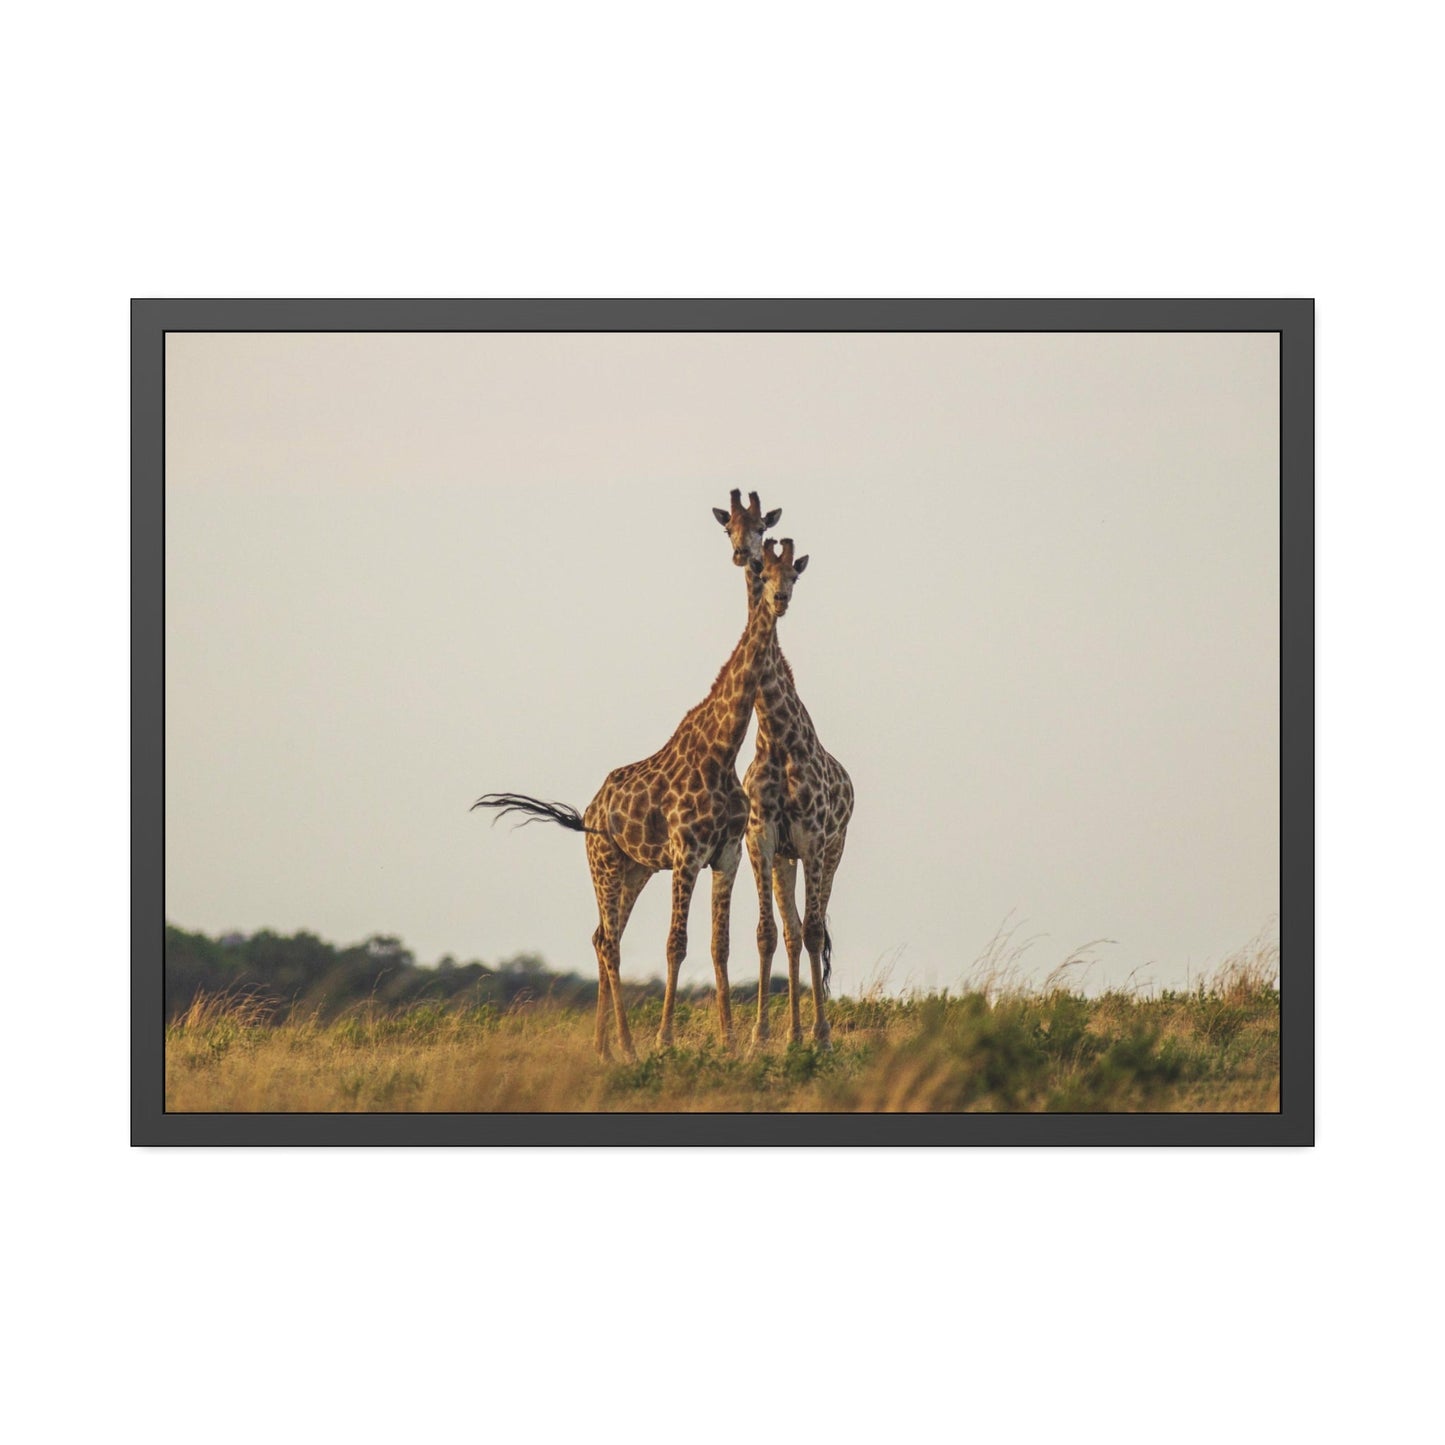 Giraffes in the Wild: Stunning Natural Canvas Print of Majestic Animals